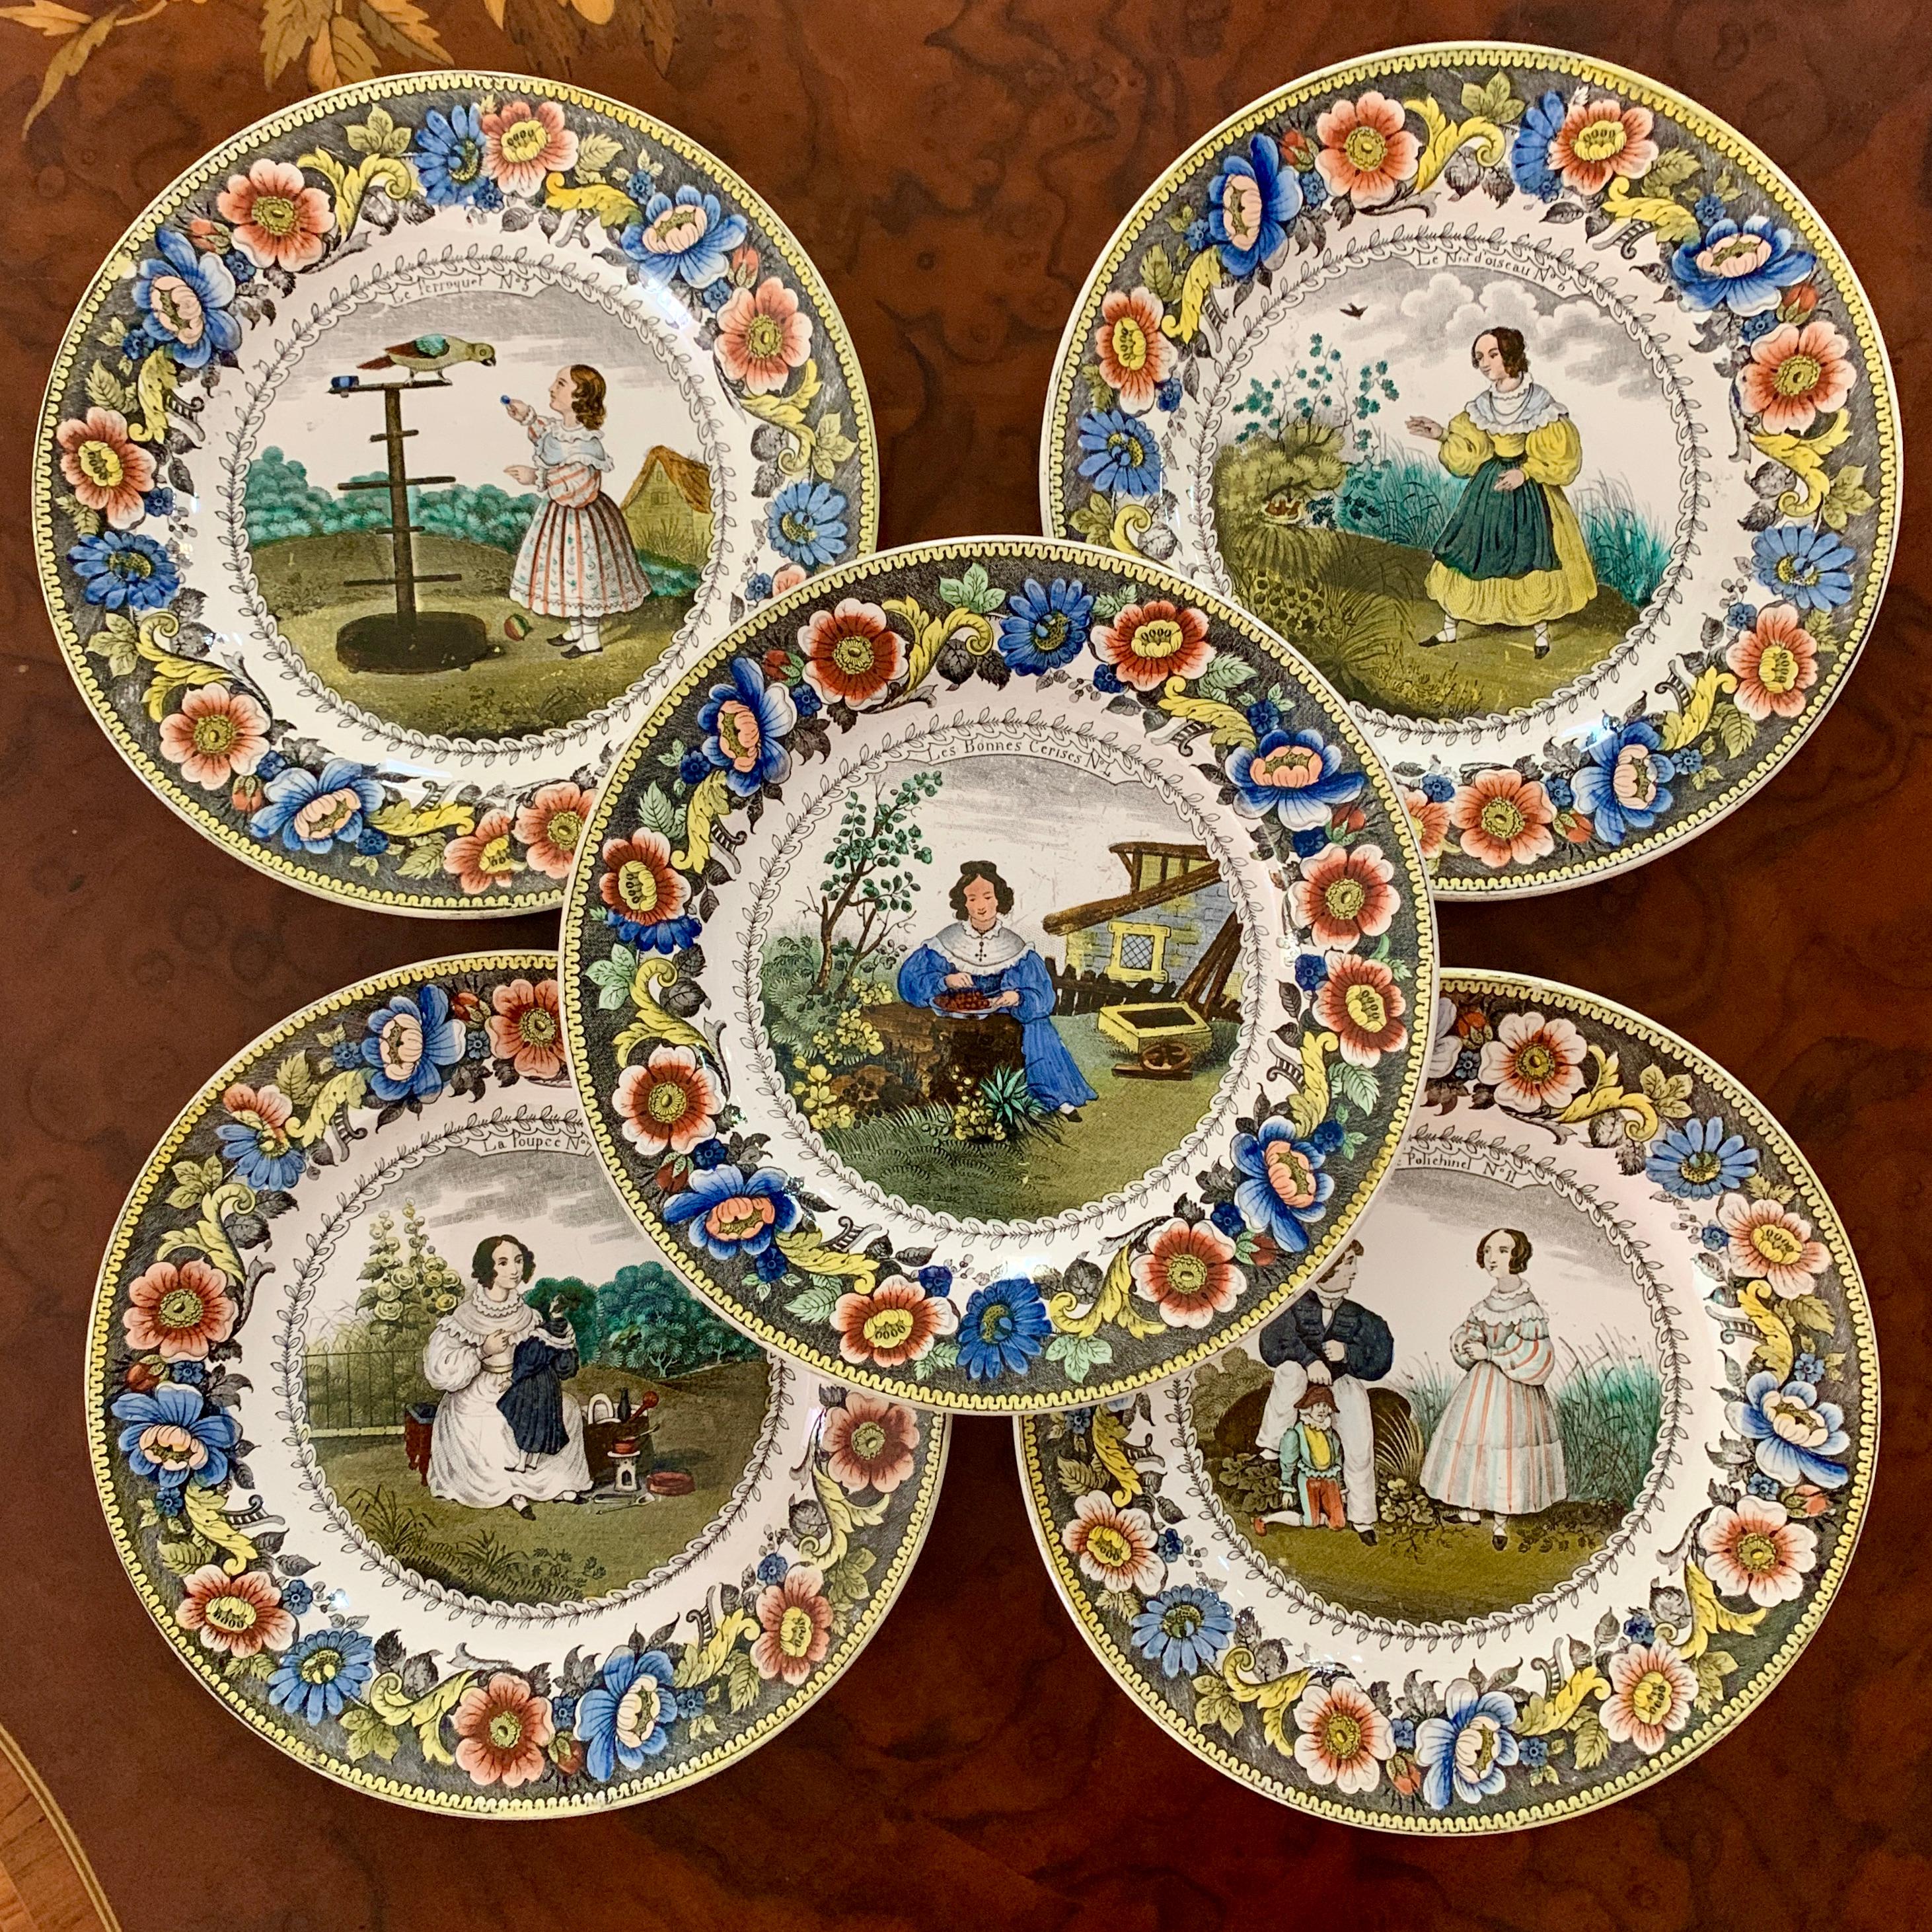 From the Creil region of Northern France, a transfer printed polychrome plate, titled – Le Perroquet (the parrot) Circa 1830.

The image shows No. 5 from a series of twelve. A young lady in a bright pink striped period dress, stands in a garden